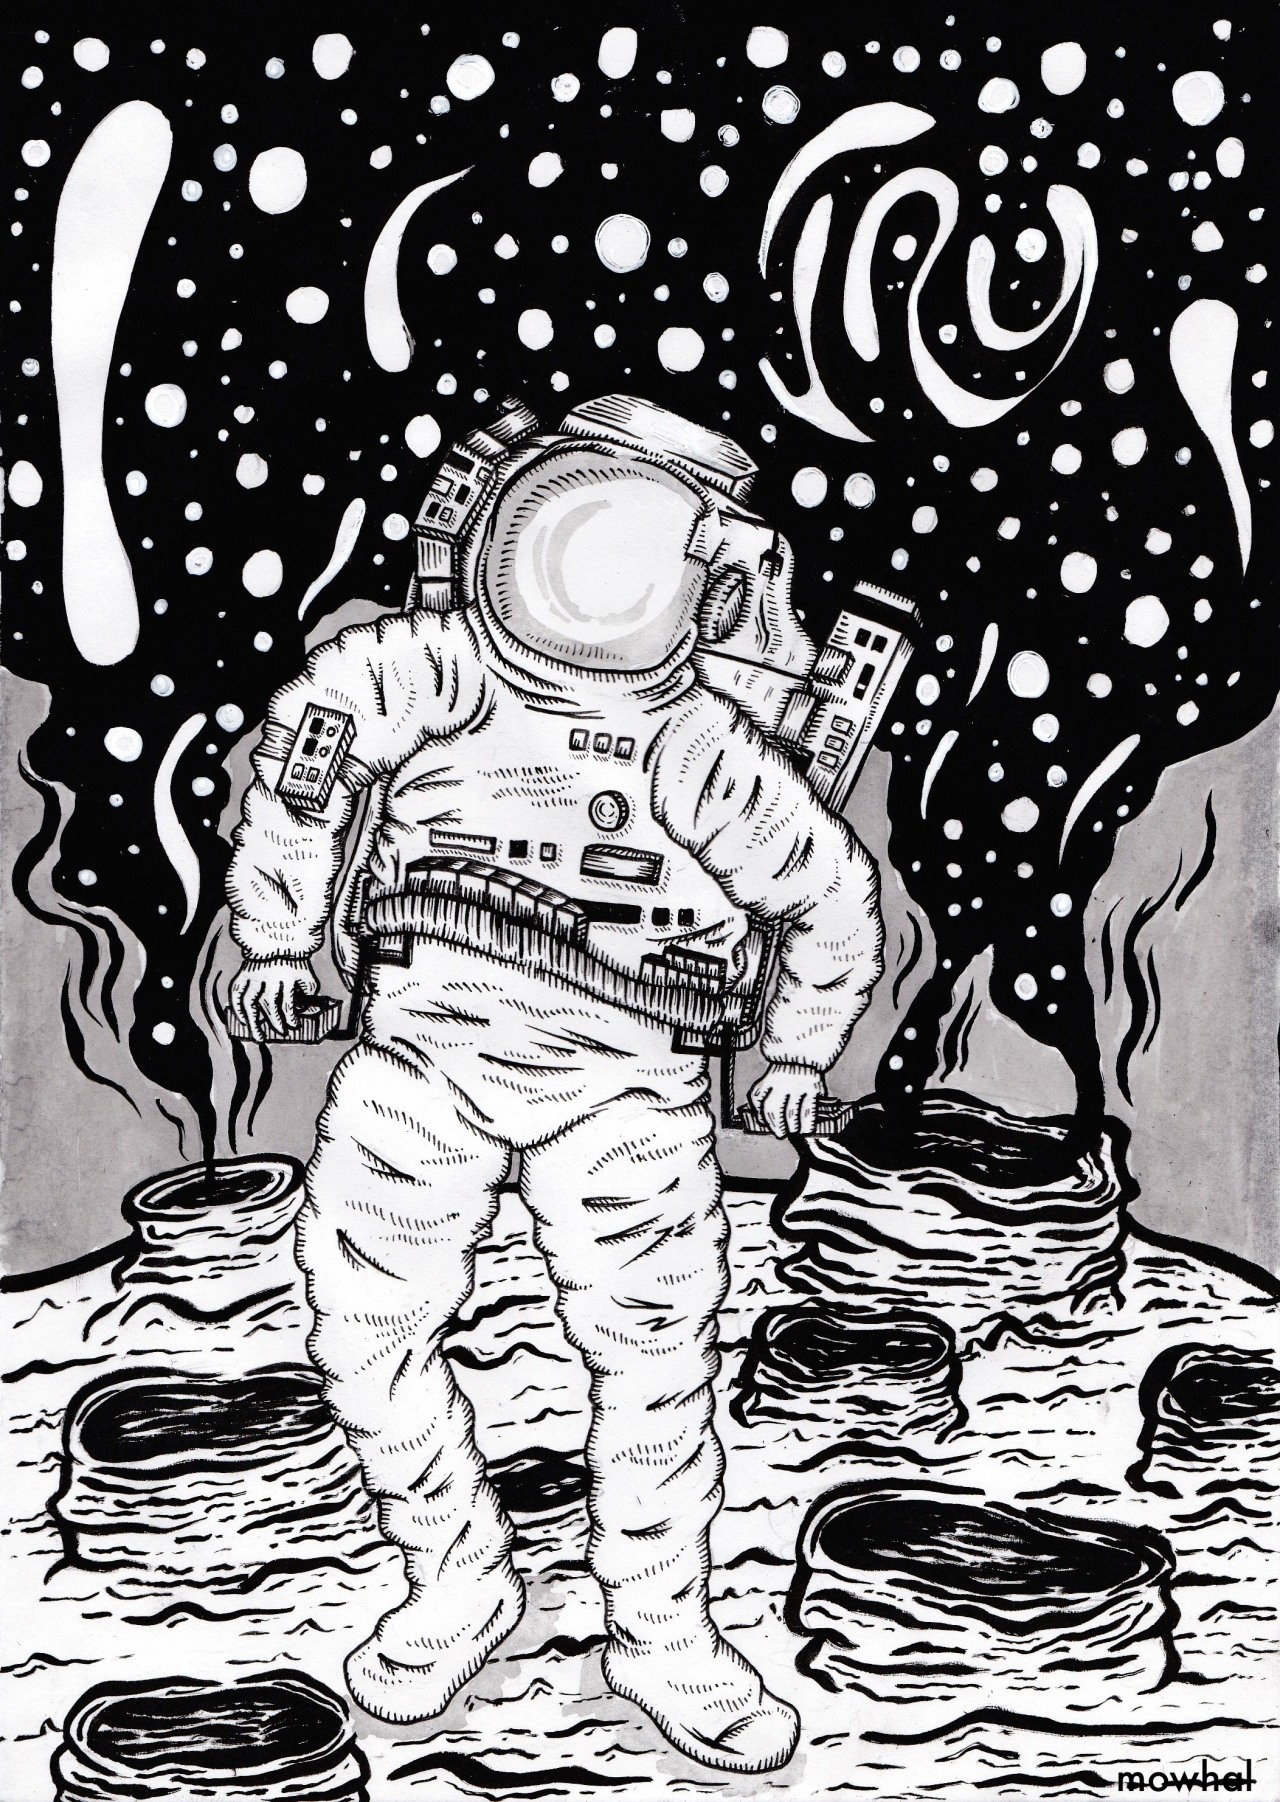 the astronaut —drawing & brush pens with acrylic paint 17/09/14 instagram tumblr